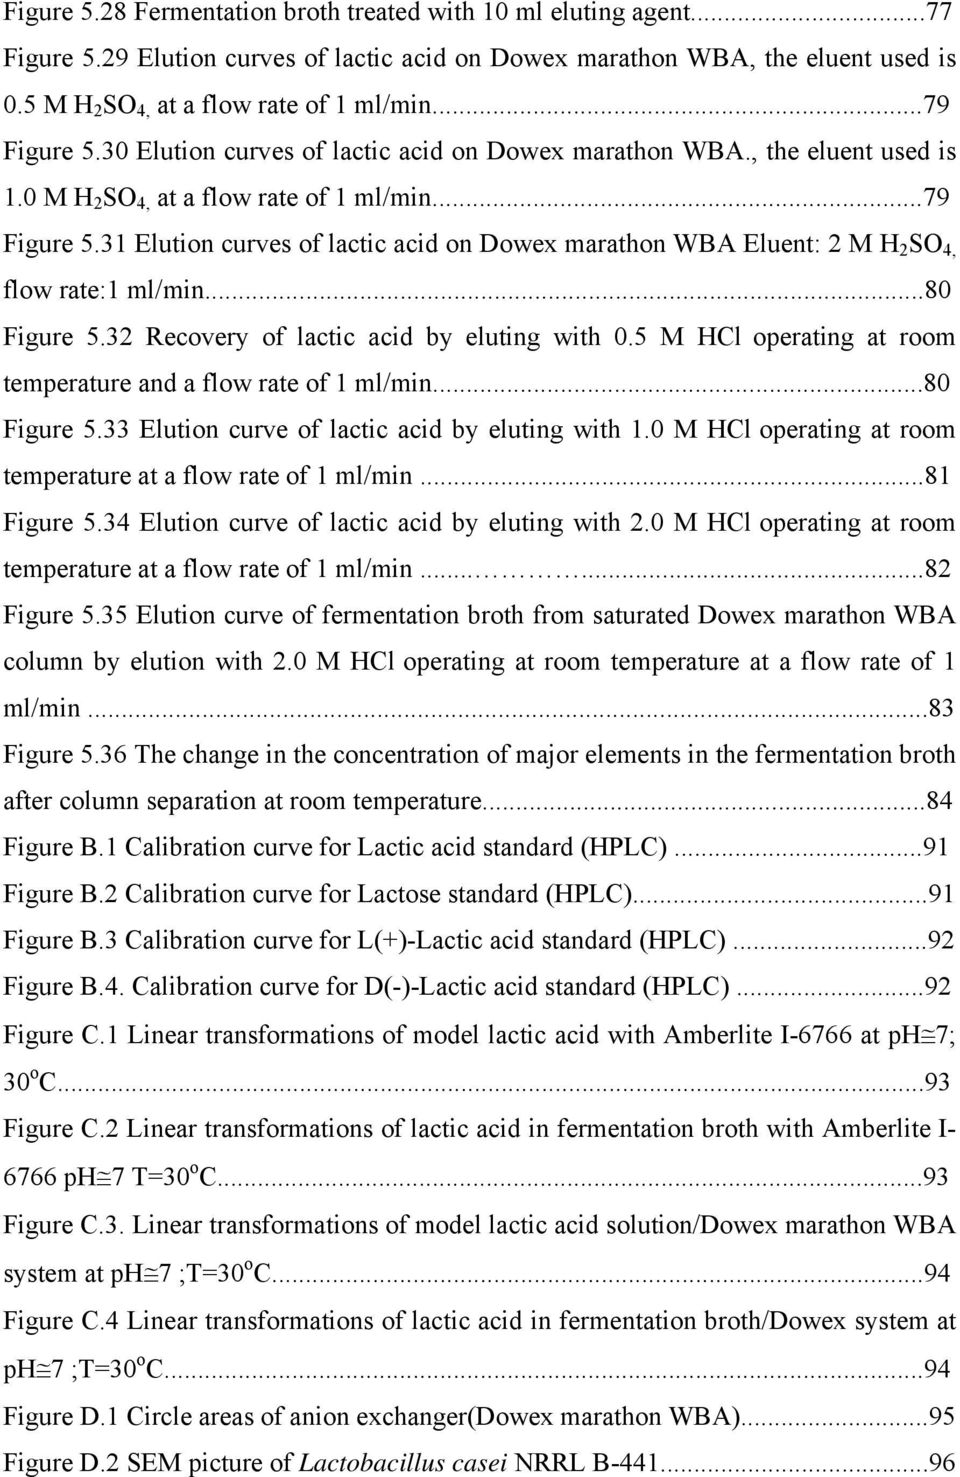 ..80 Figure 5.32 Recovery of lactic acid by eluting with 0.5 M HCl operating at room temperature and a flow rate of 1 ml/min...80 Figure 5.33 Elution curve of lactic acid by eluting with 1.